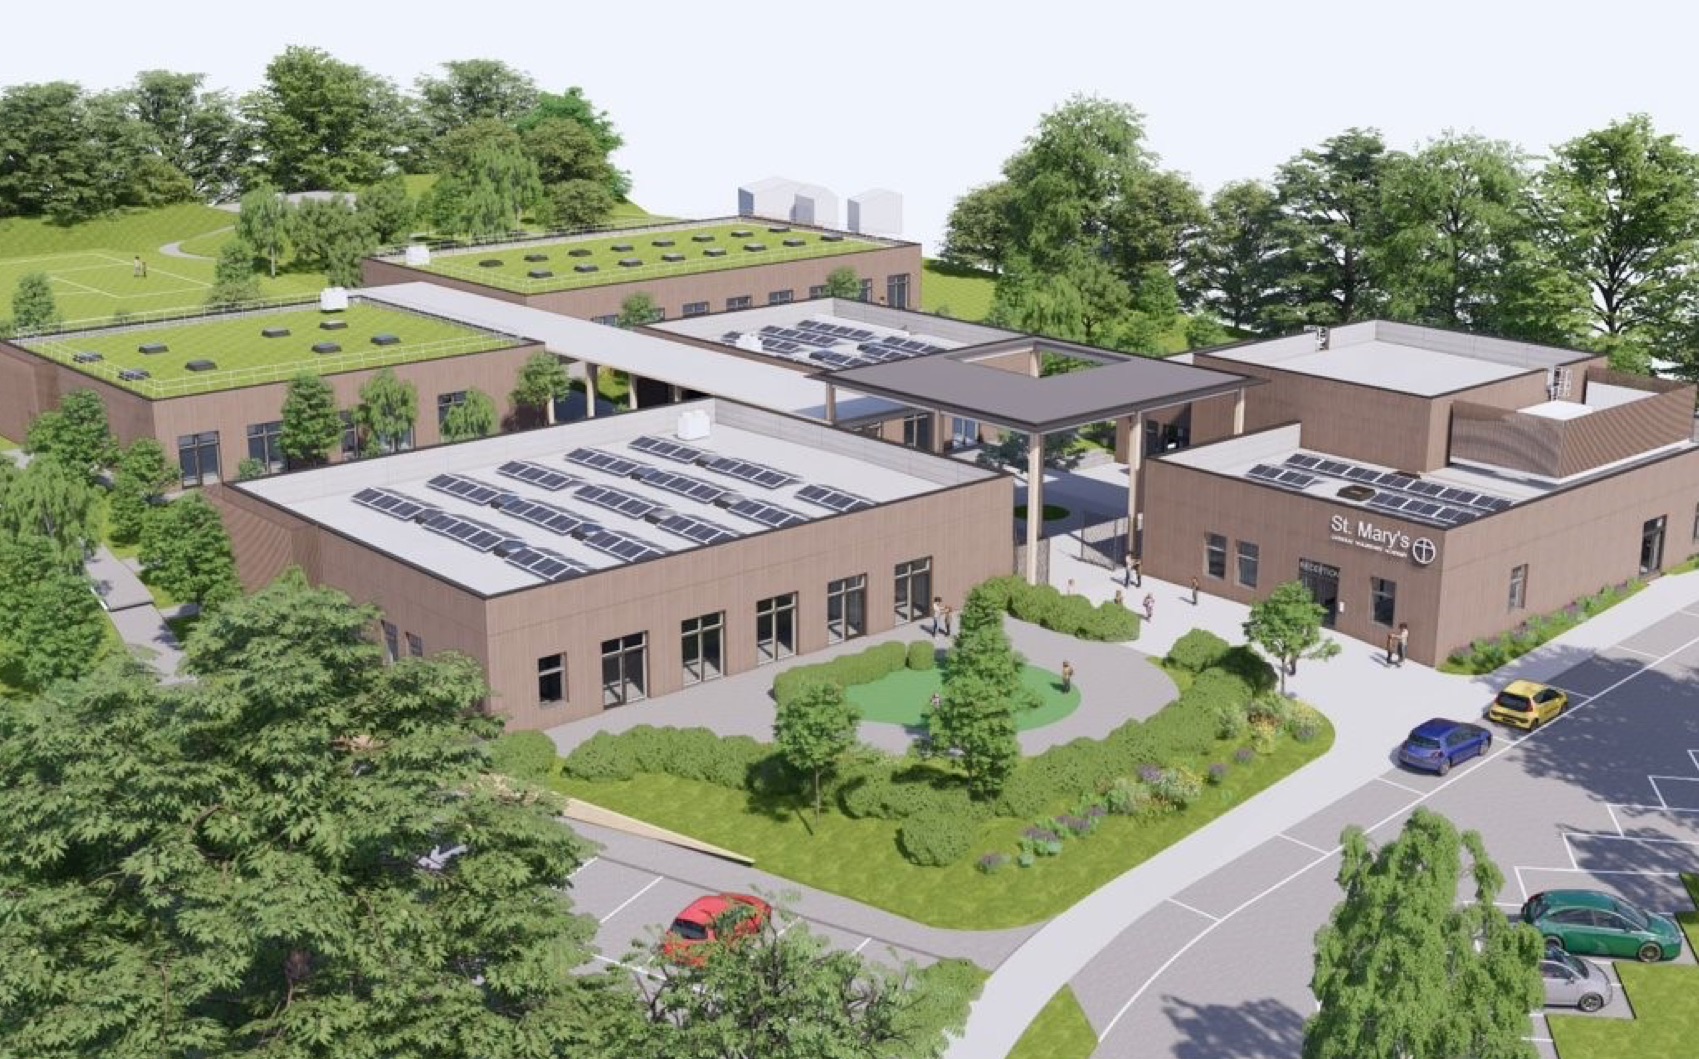 Construction begins of the UK’s first purpose-built biophilic primary school